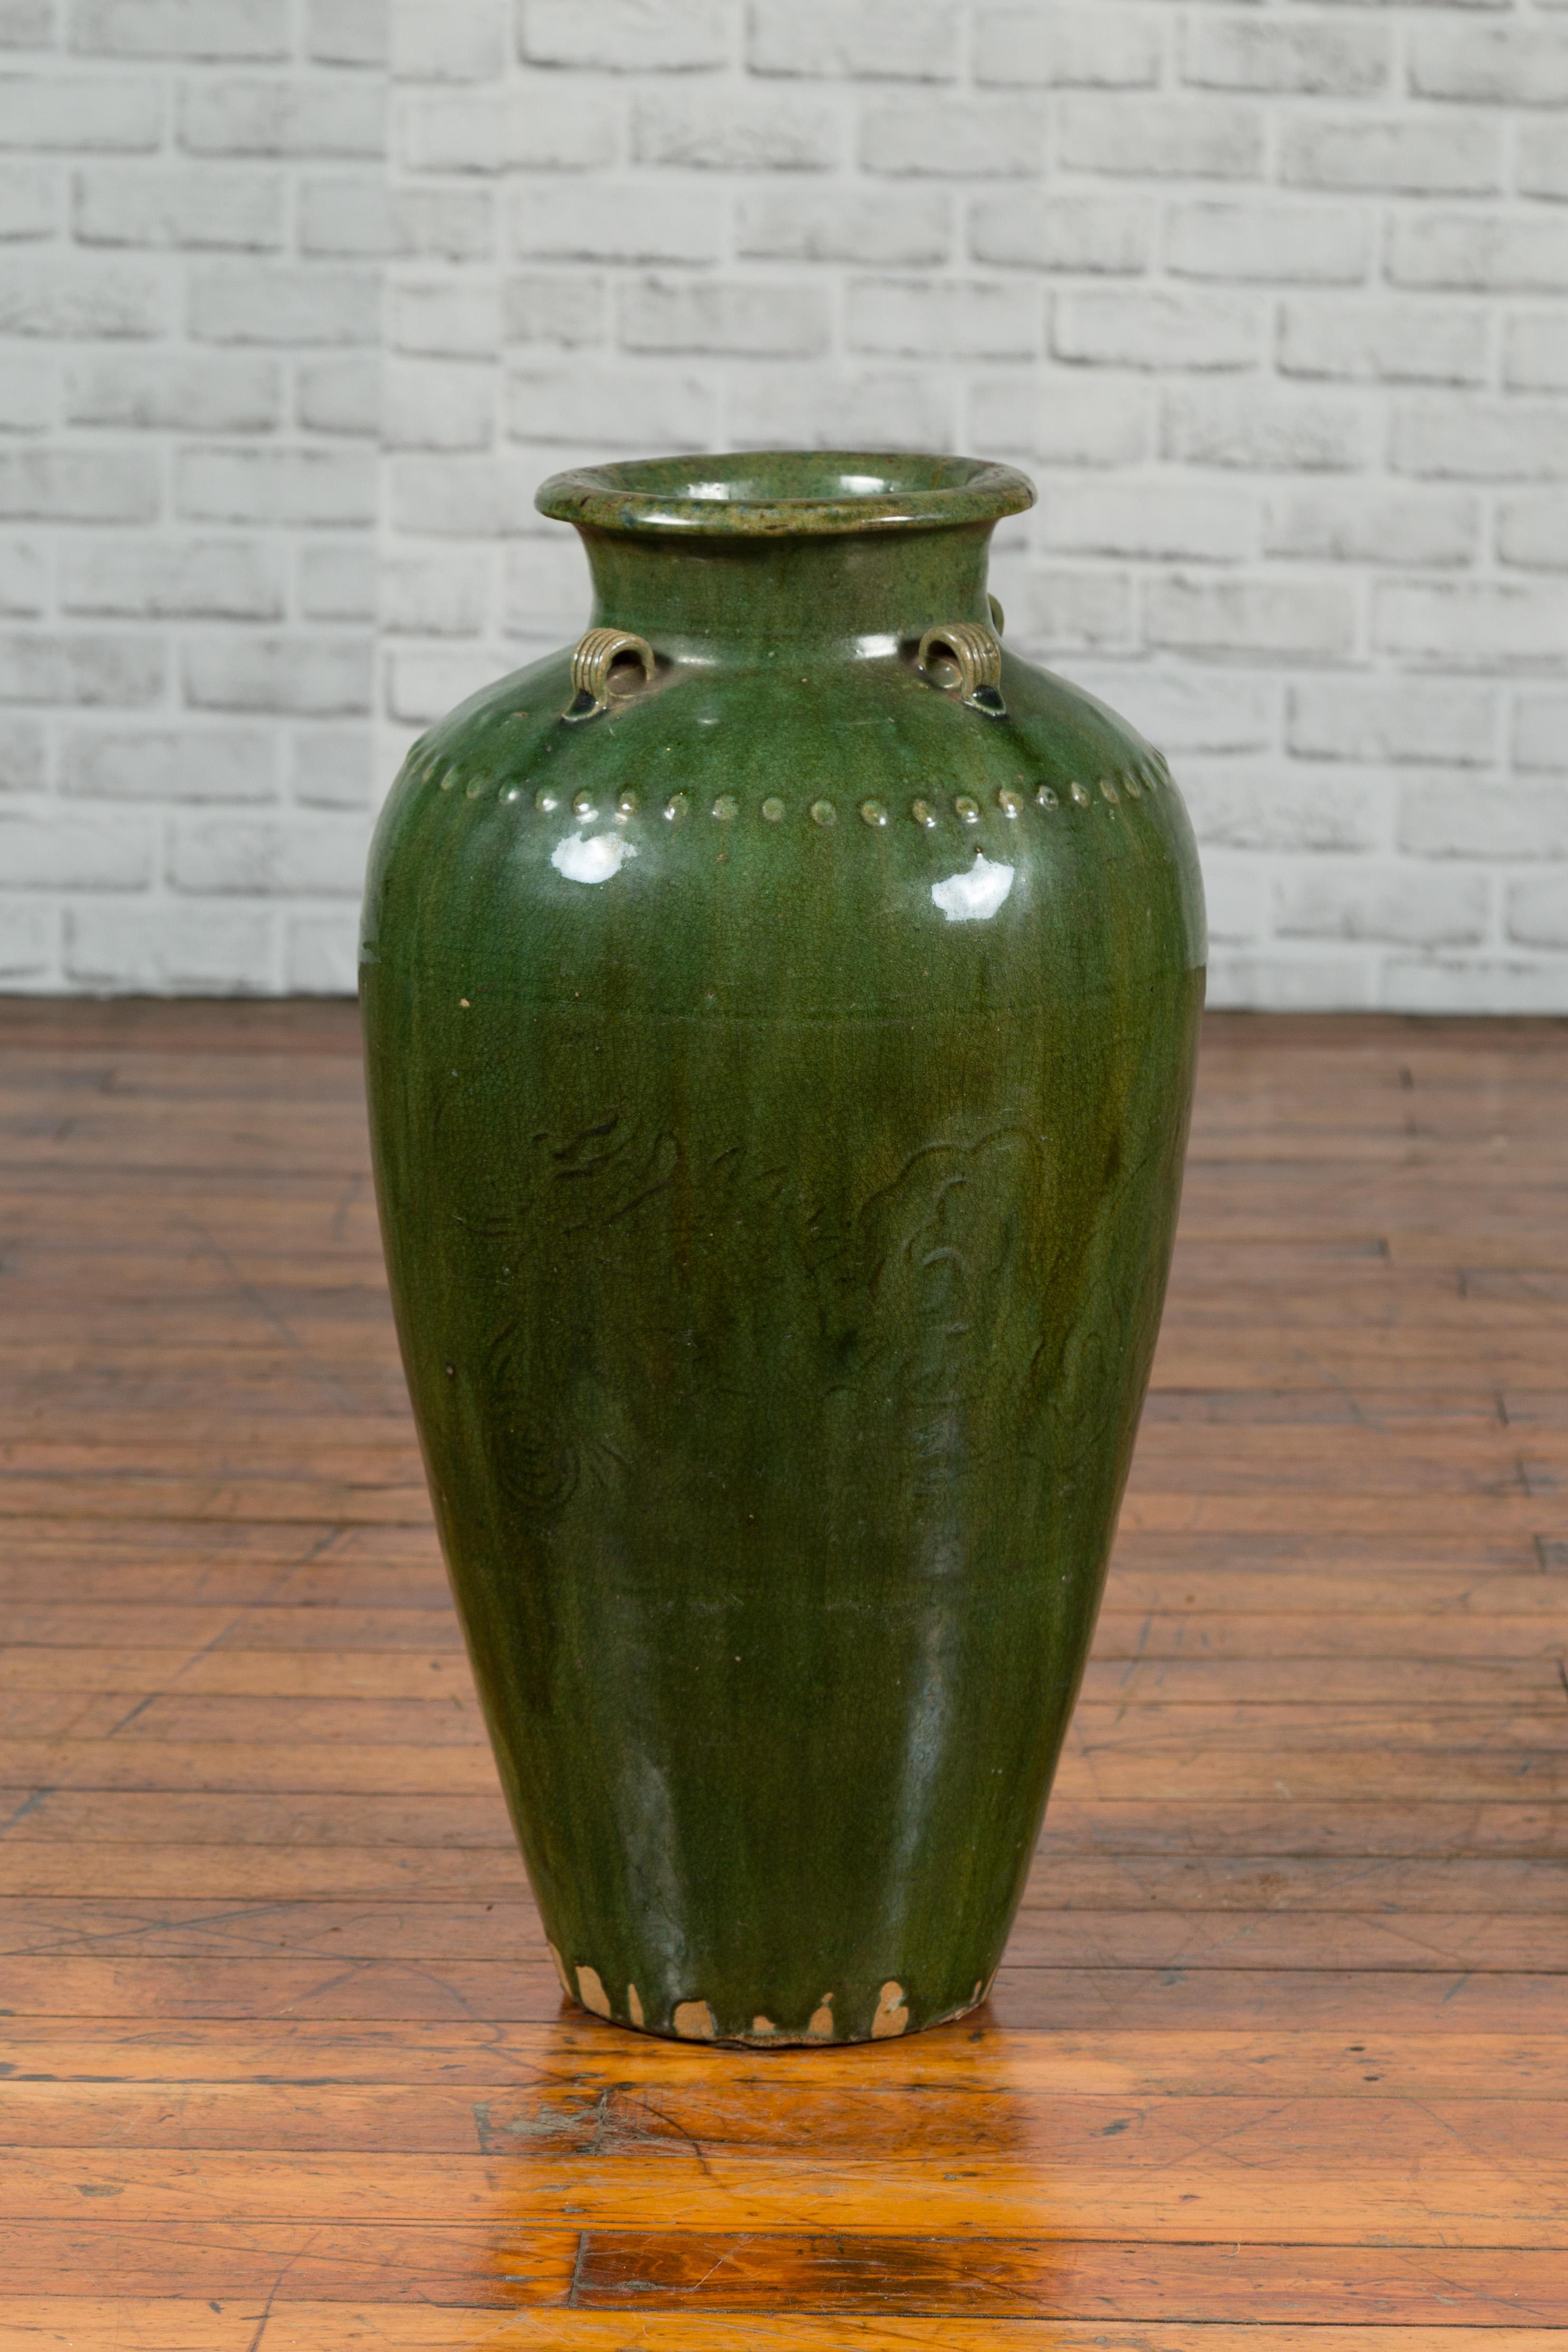 A green glazed Martaban water jug from the 19th century, with petite handles and faint decor. Charming us with its green glaze perfectly accented with petite beads on the upper body, this Martaban water jug is adorned with a series of petite loop